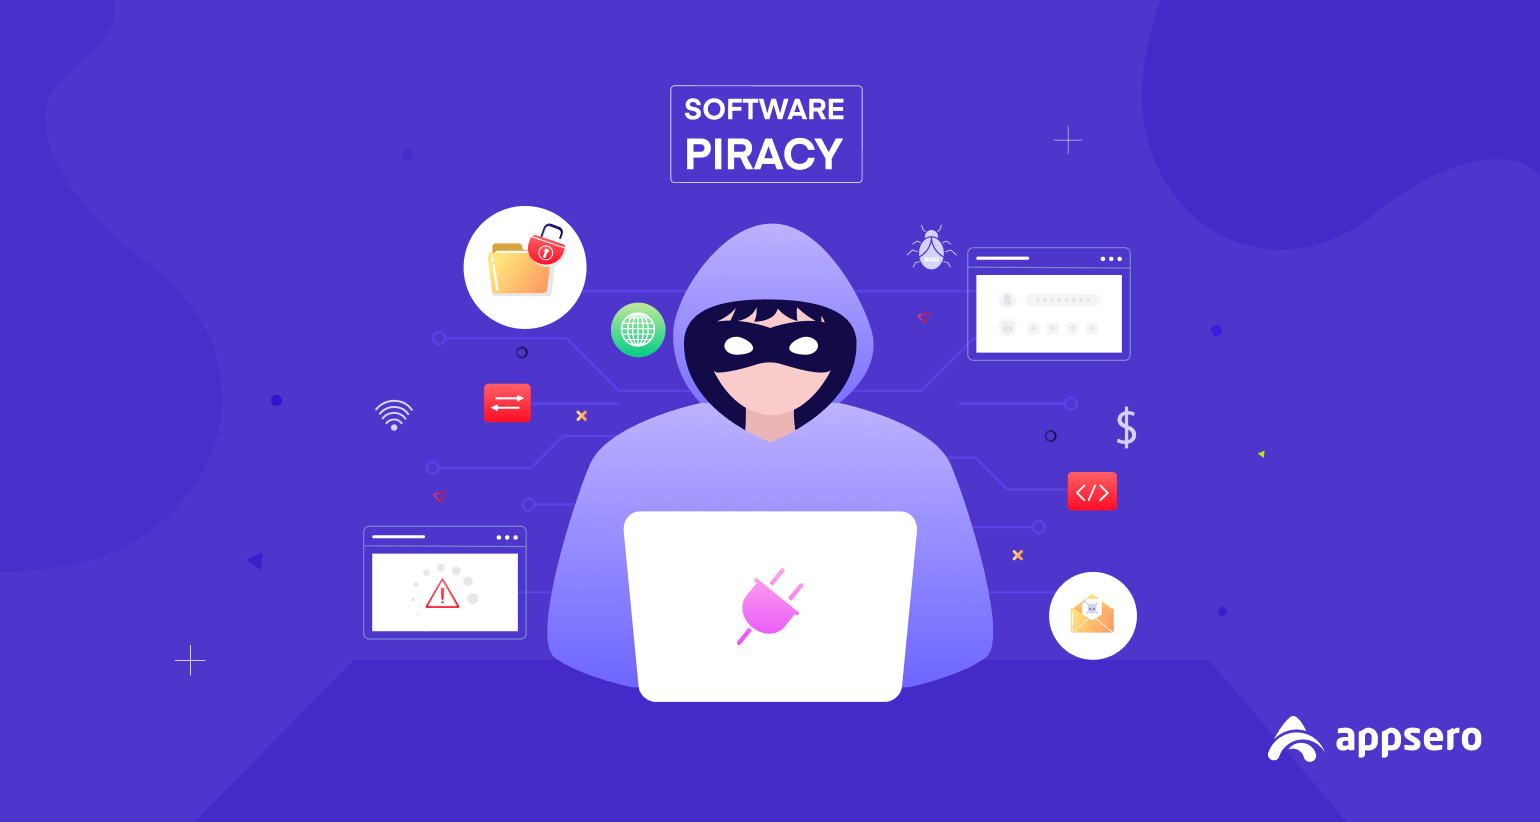 What is Software Piracy